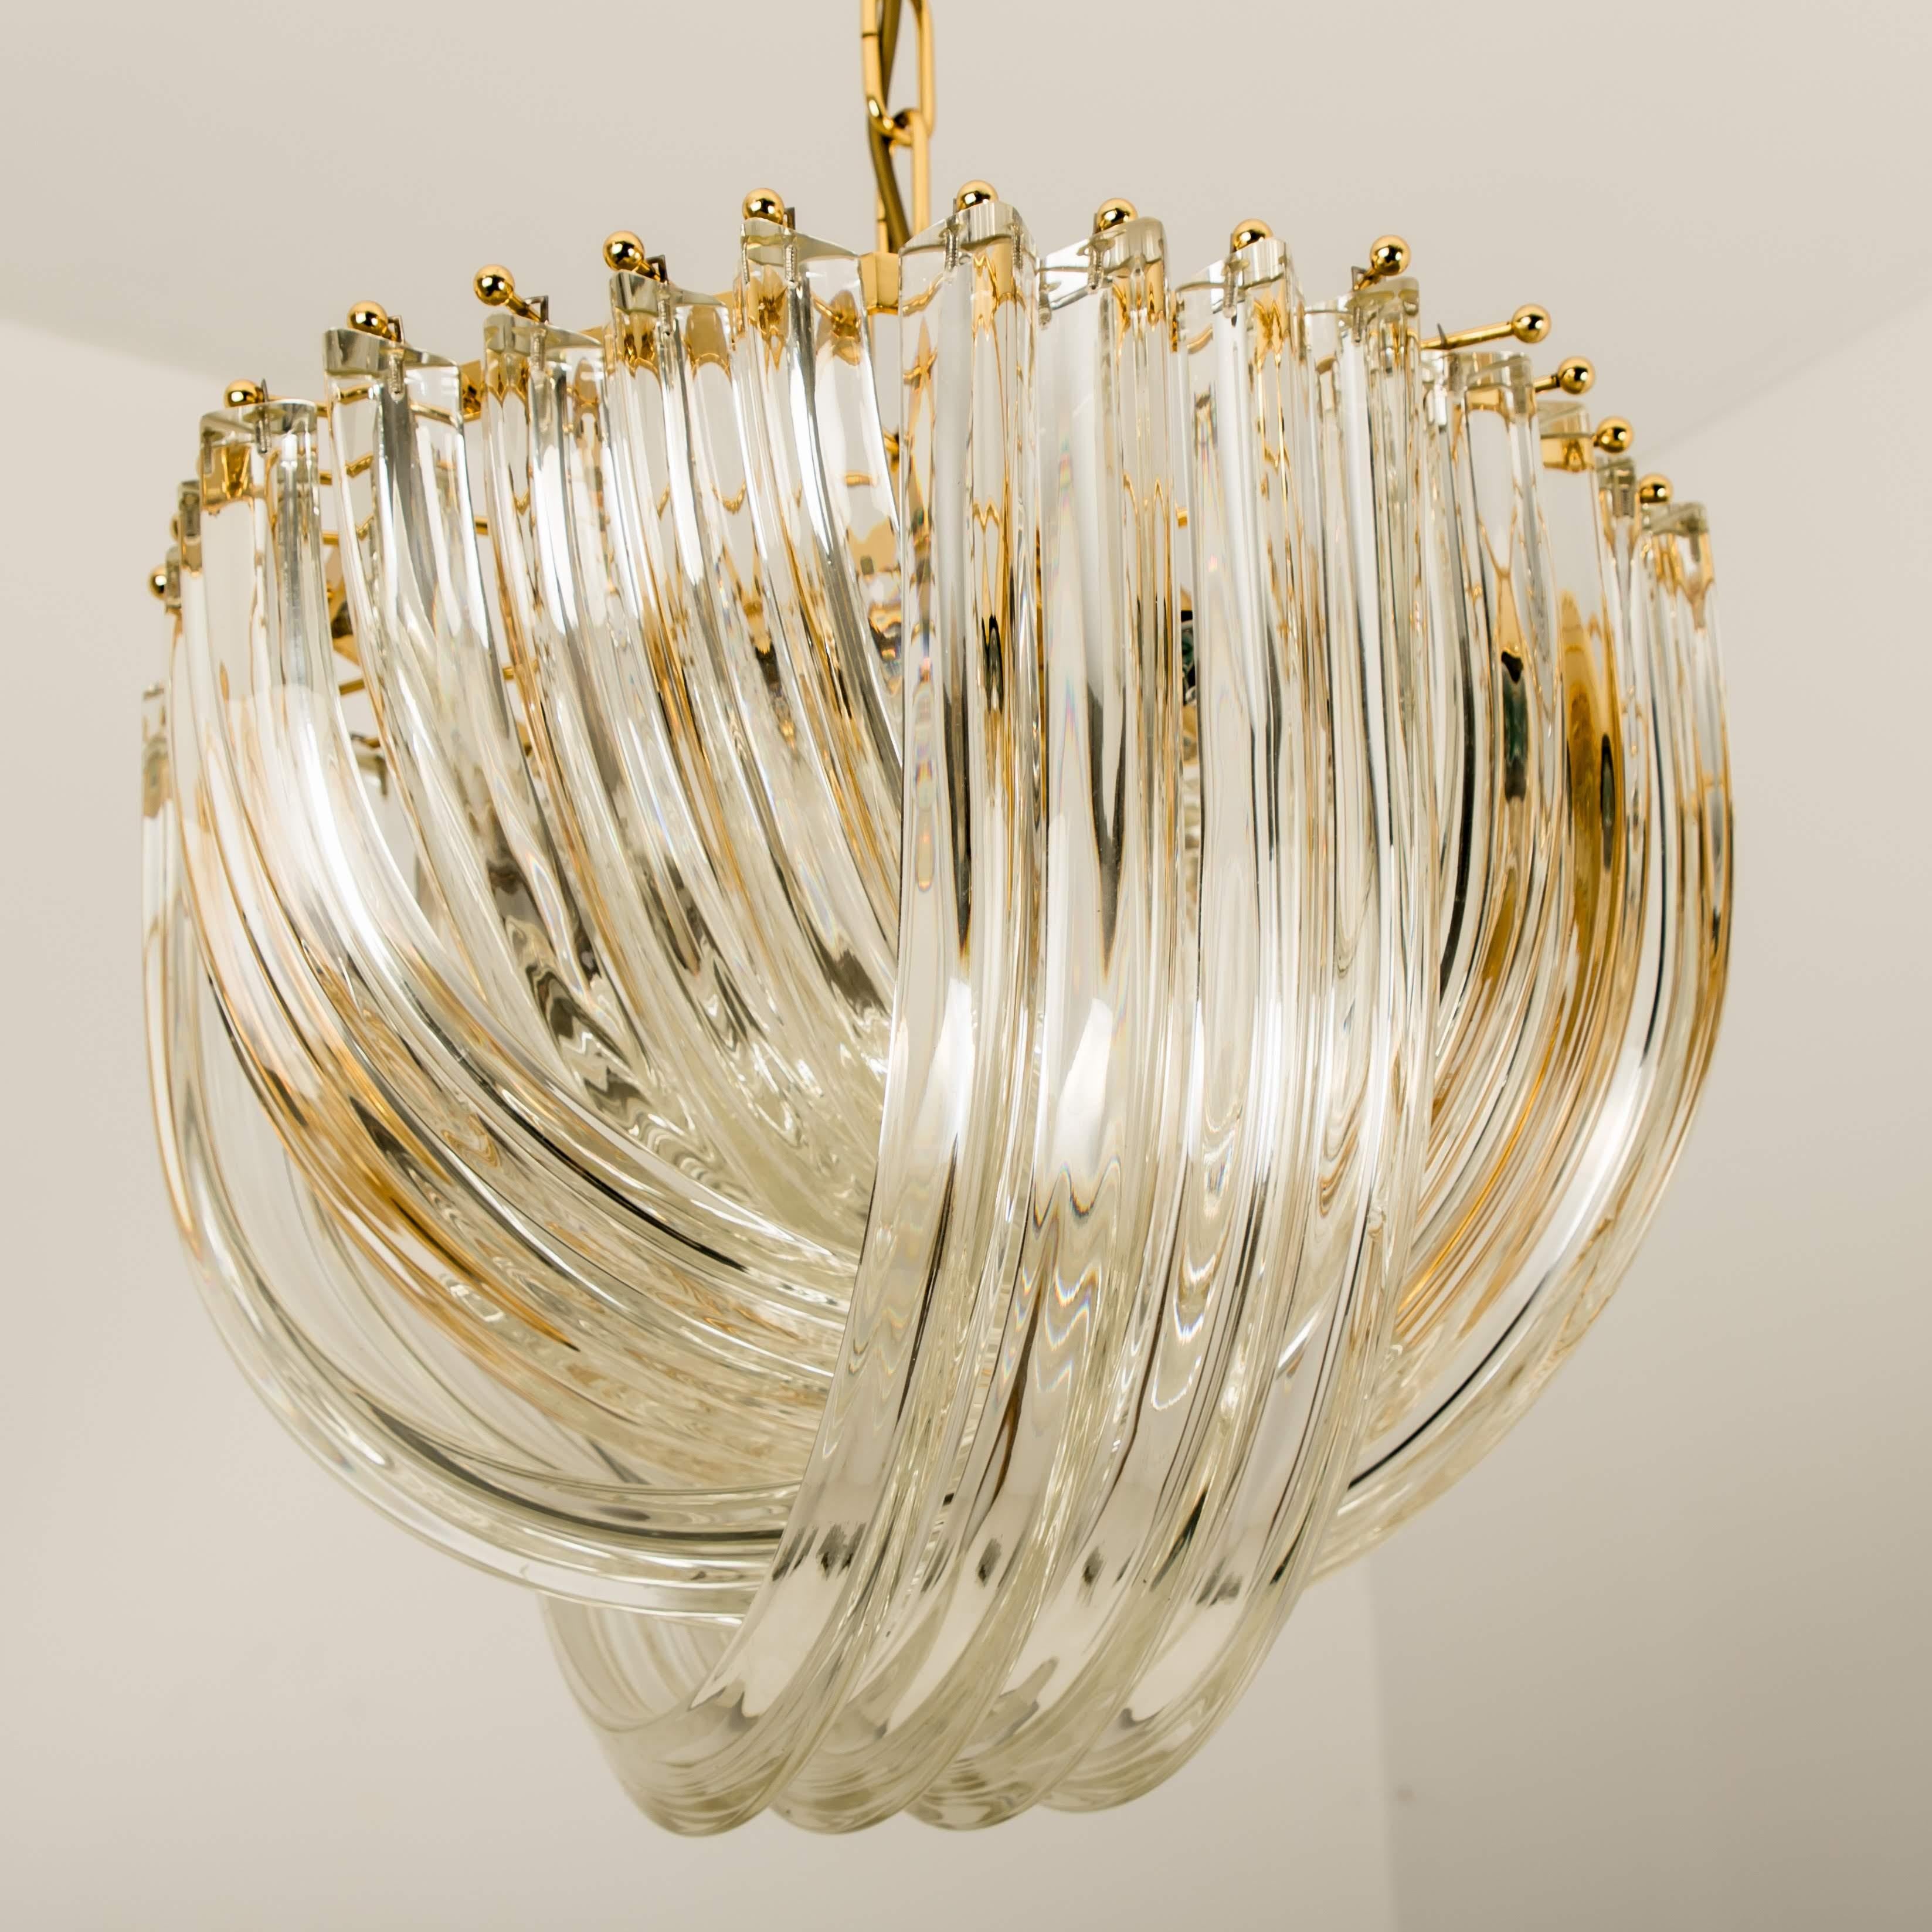 Mid-Century Modern Pair of Venini Light Fixtures, Curved Crystal Glass and Gilt Brass, Italy